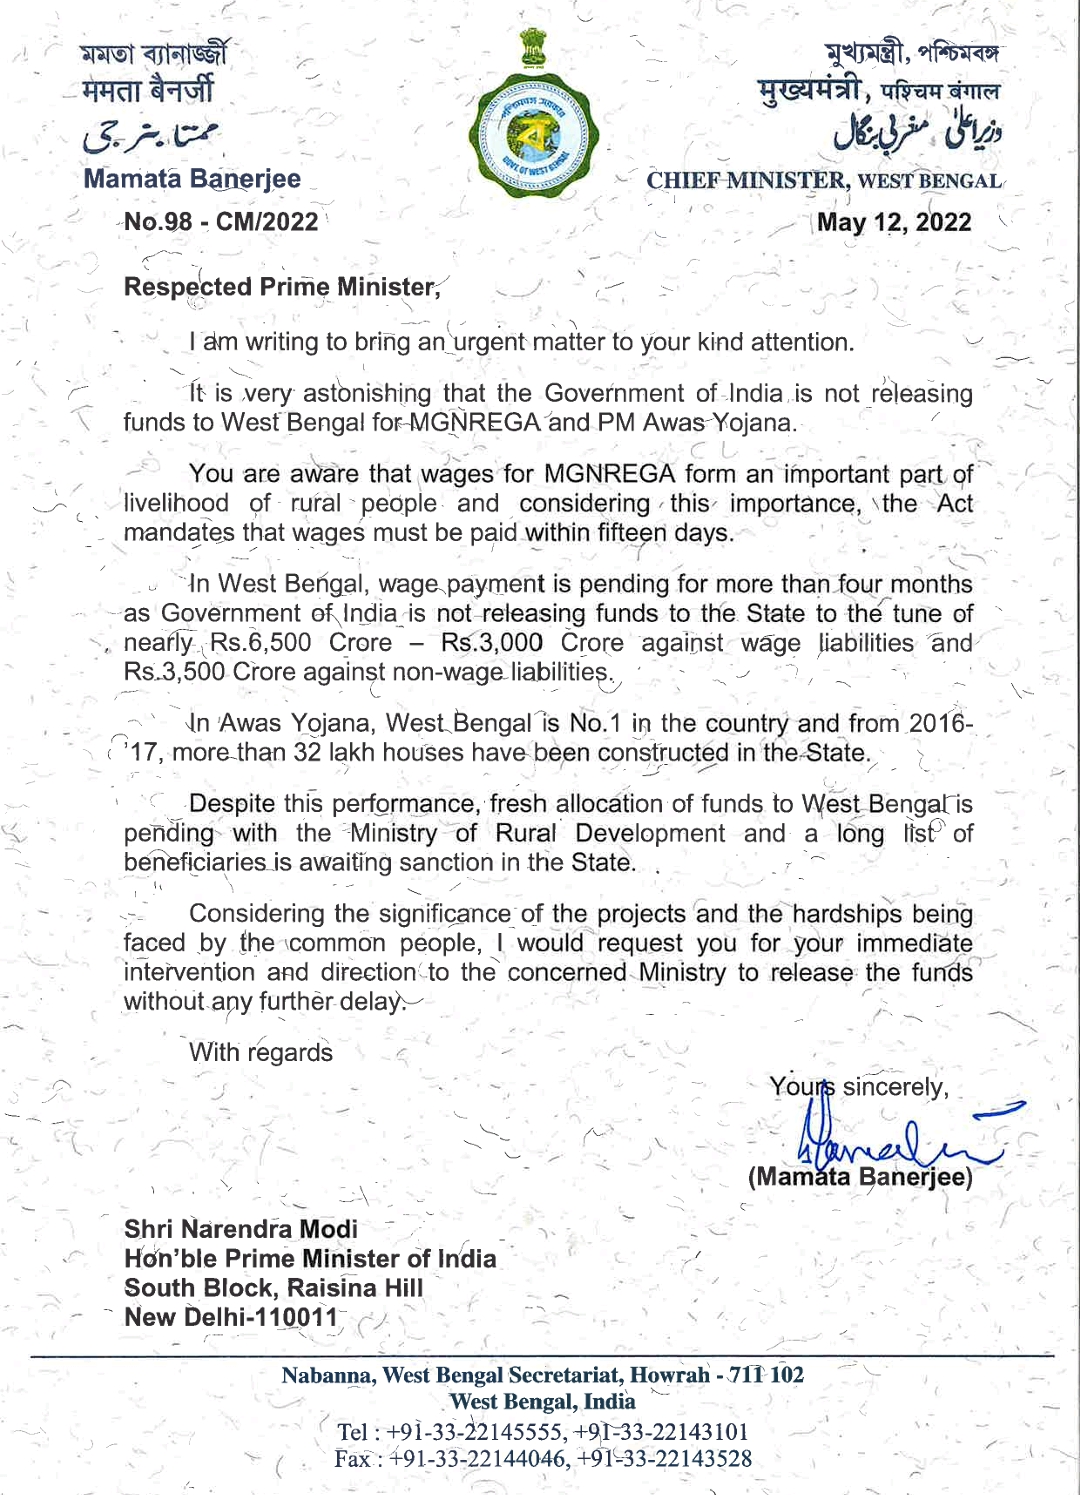 mamata sends letter to pm modi demanding payment from the central government